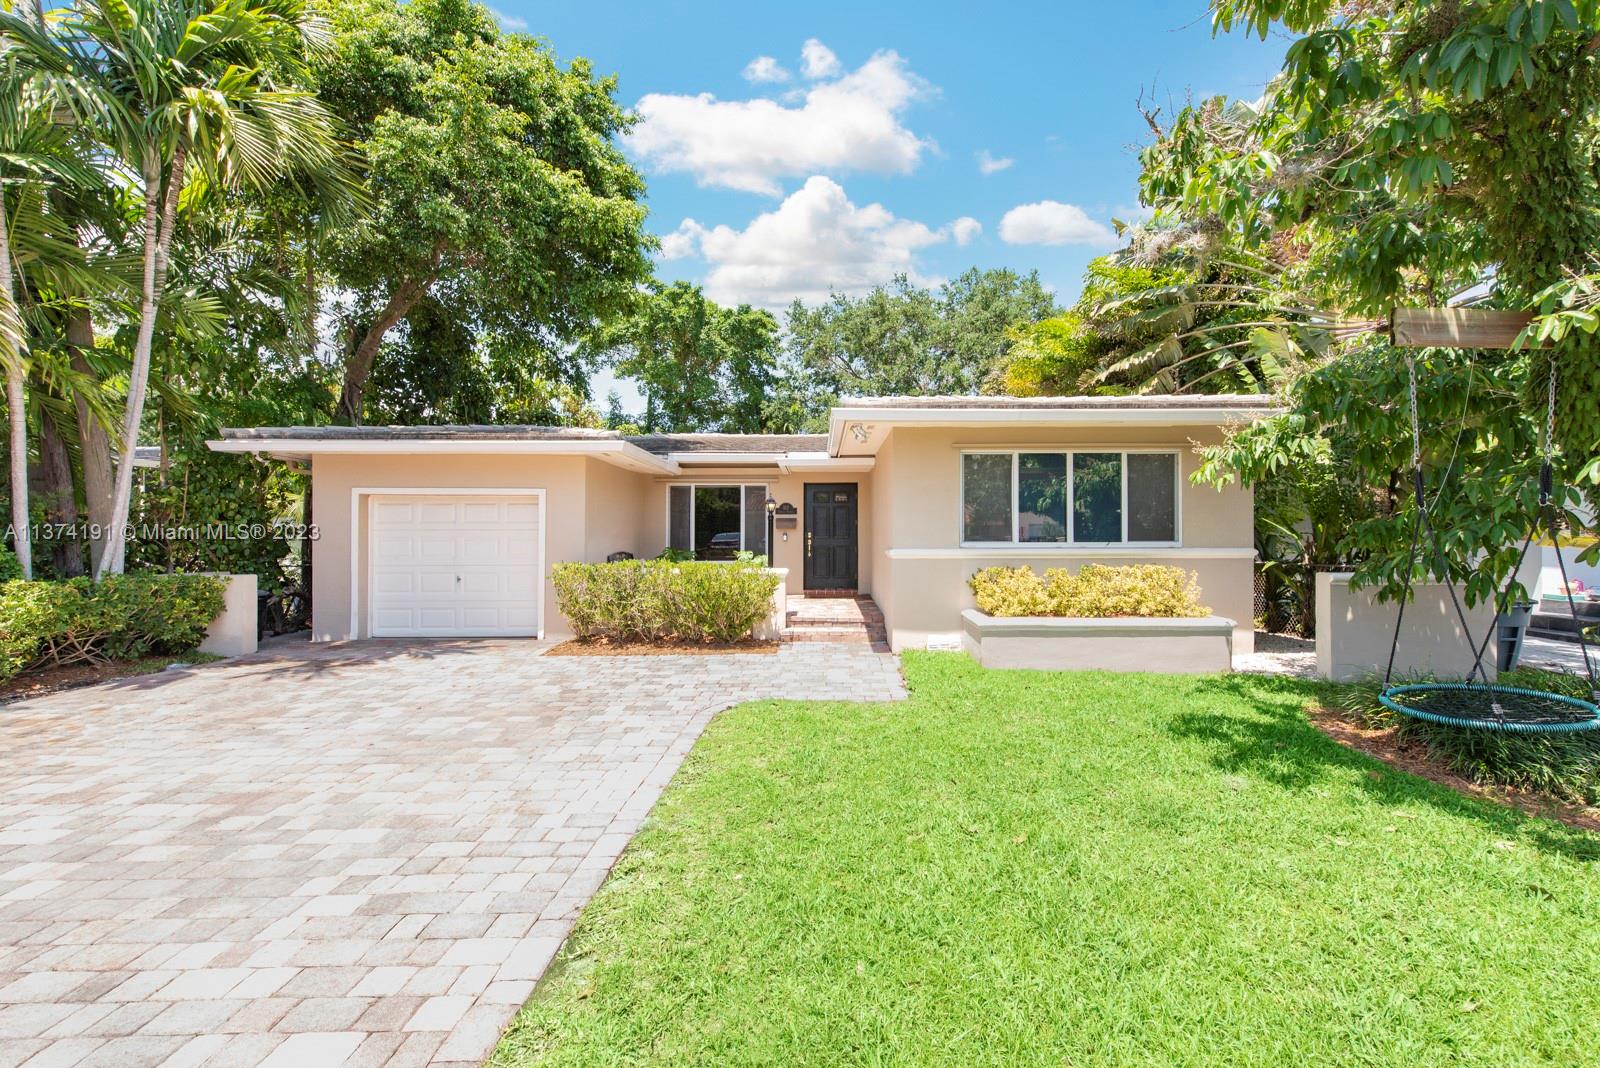 813 Angelo Ave, Coral Gables, FL 33134